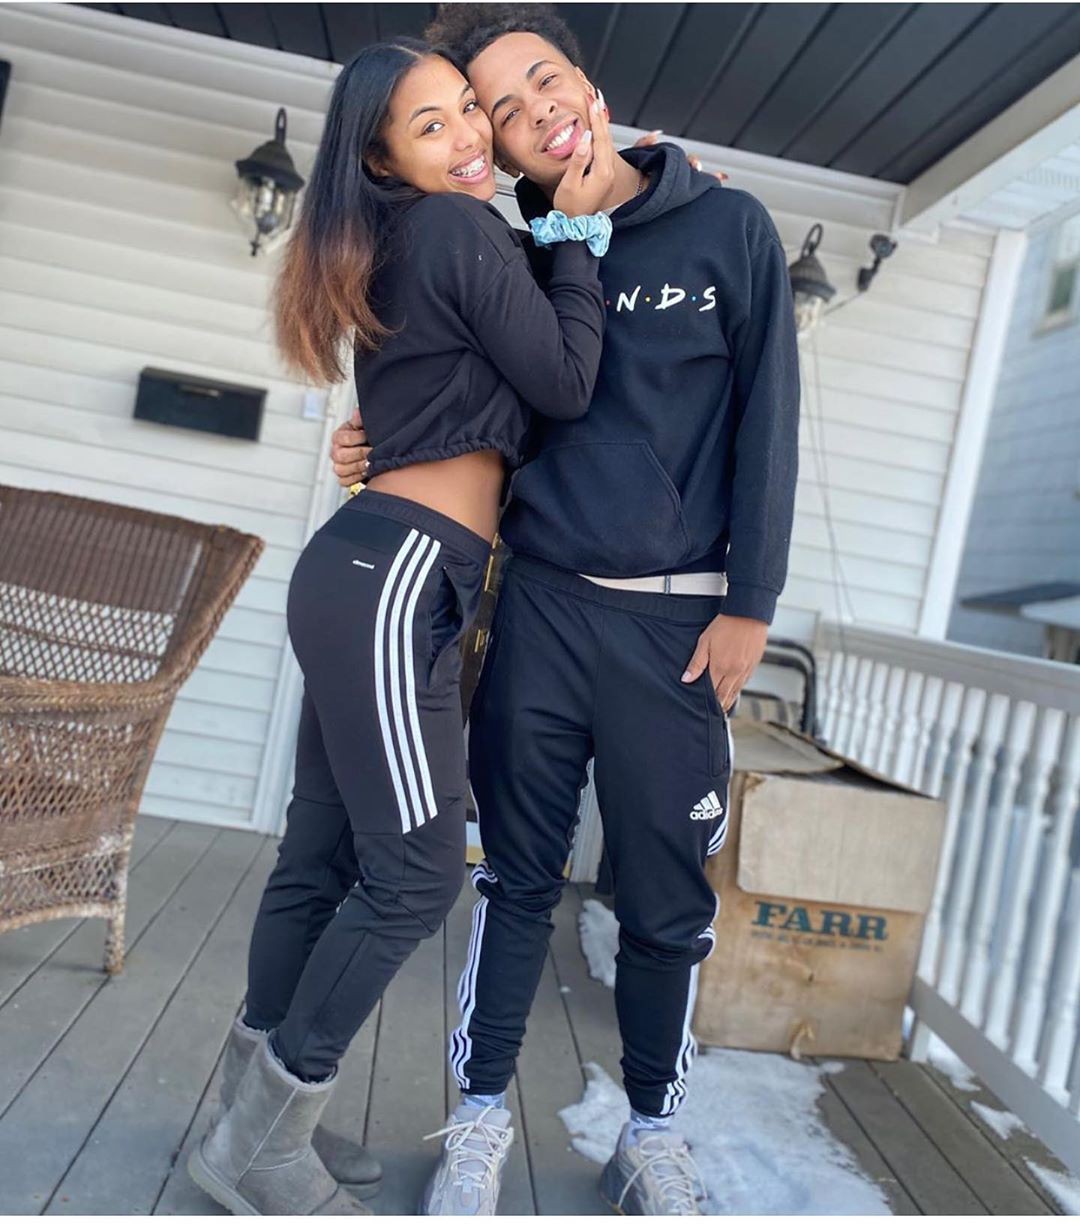 All black couple Outfits photoshoot | Dresses Images 2022 | Page 3